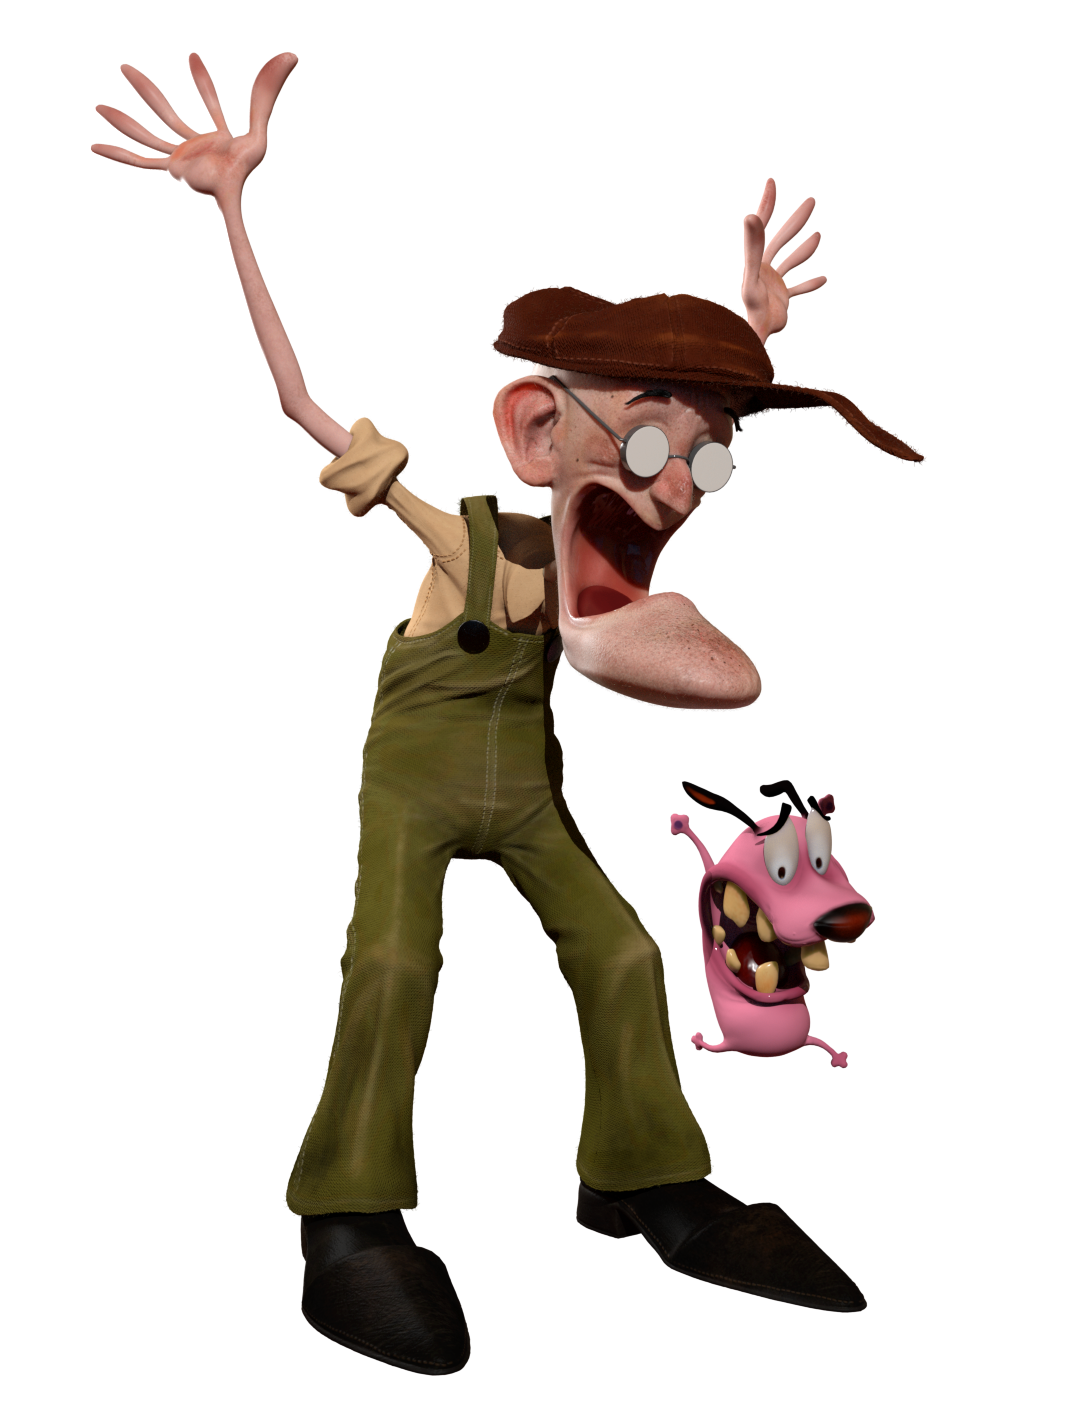 Eustace corraje cartoon networks character modeling 3D rendering vray chaos gruop